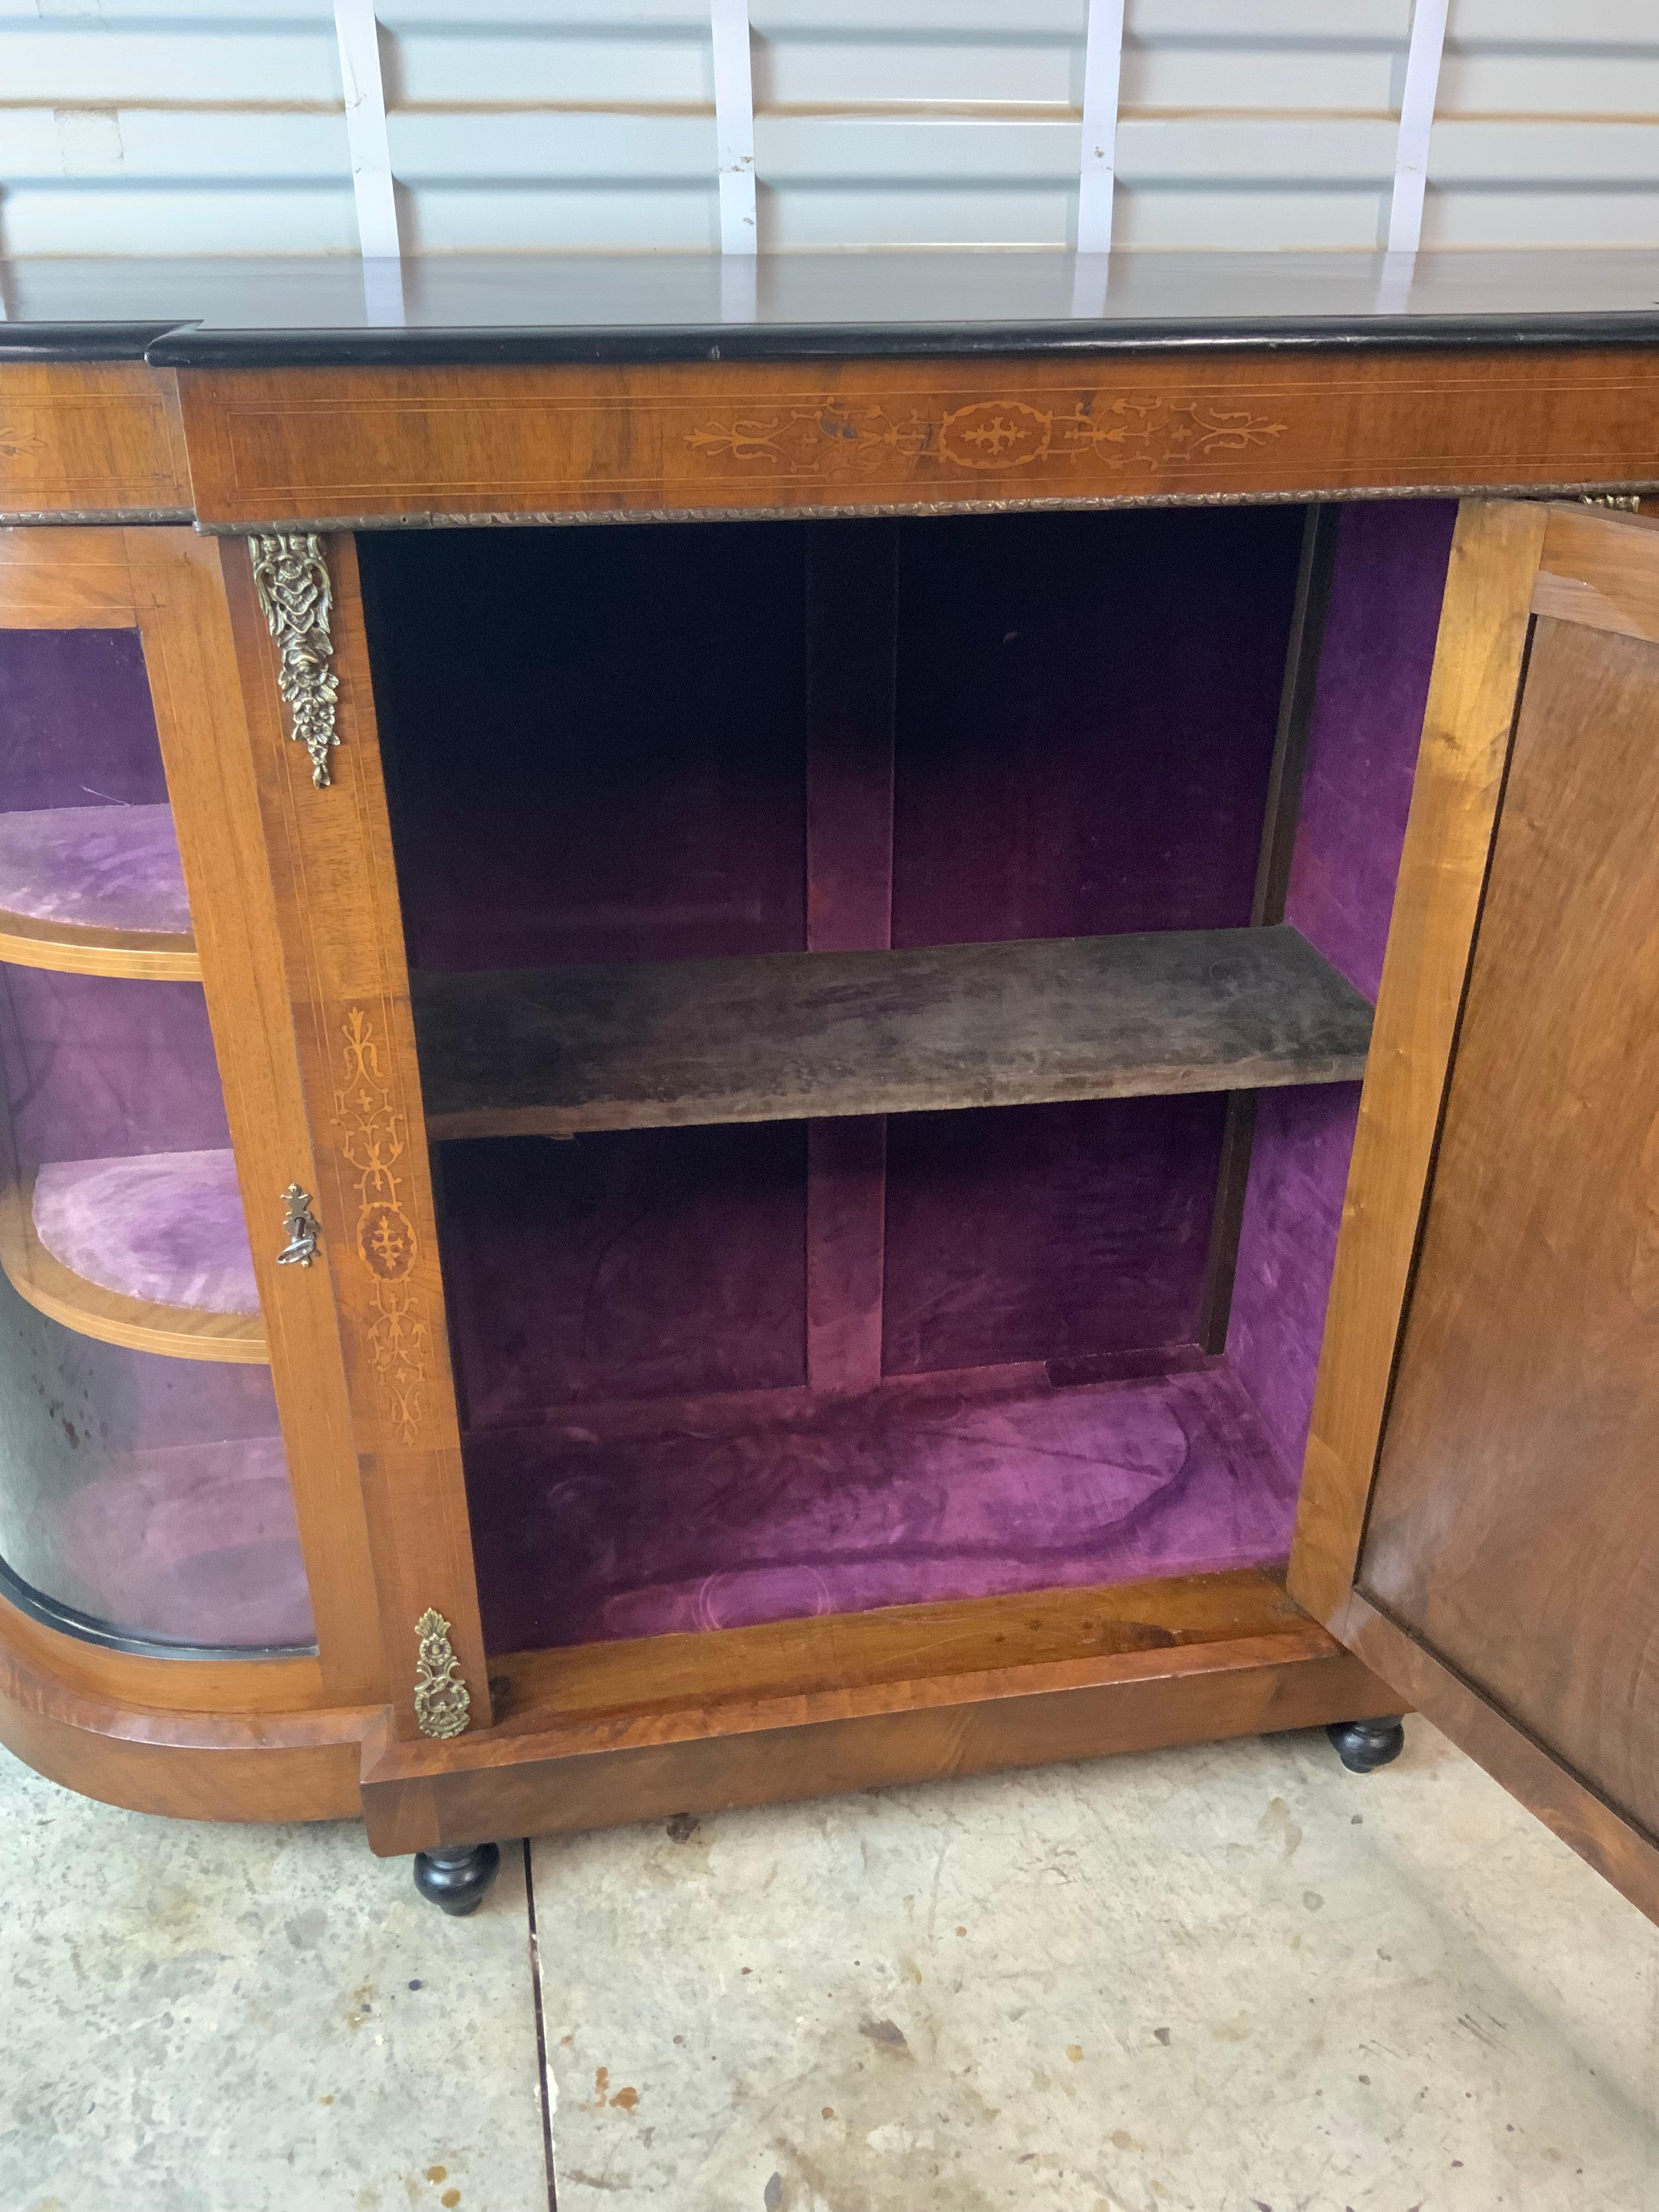 A very nice Victorian Walnut inlay Credenza with the original velvet fabric on the interior walls and shelves.  All the locks are working with the original key.   Very good original surface that has a mellow golden color to the Walnut and a great